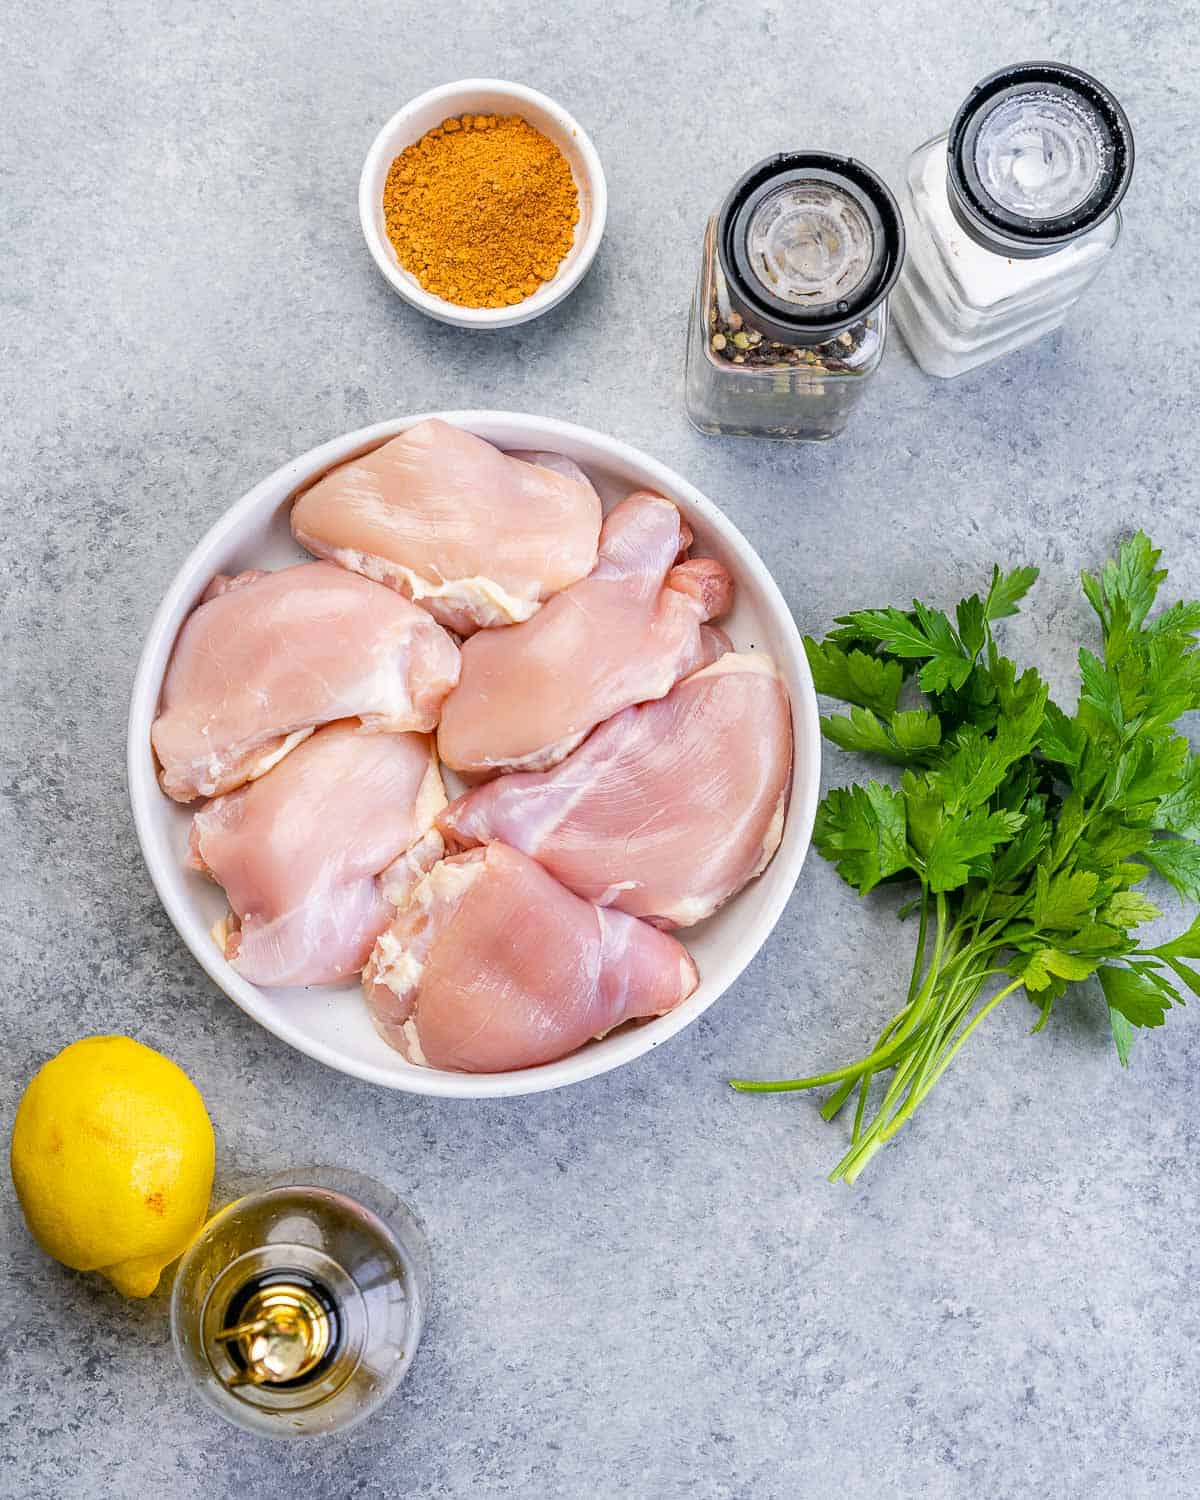 Raw chicken thighs in a bowl near fresh parsley, a lemon, olive oil and a small bowl of taco seasoning.